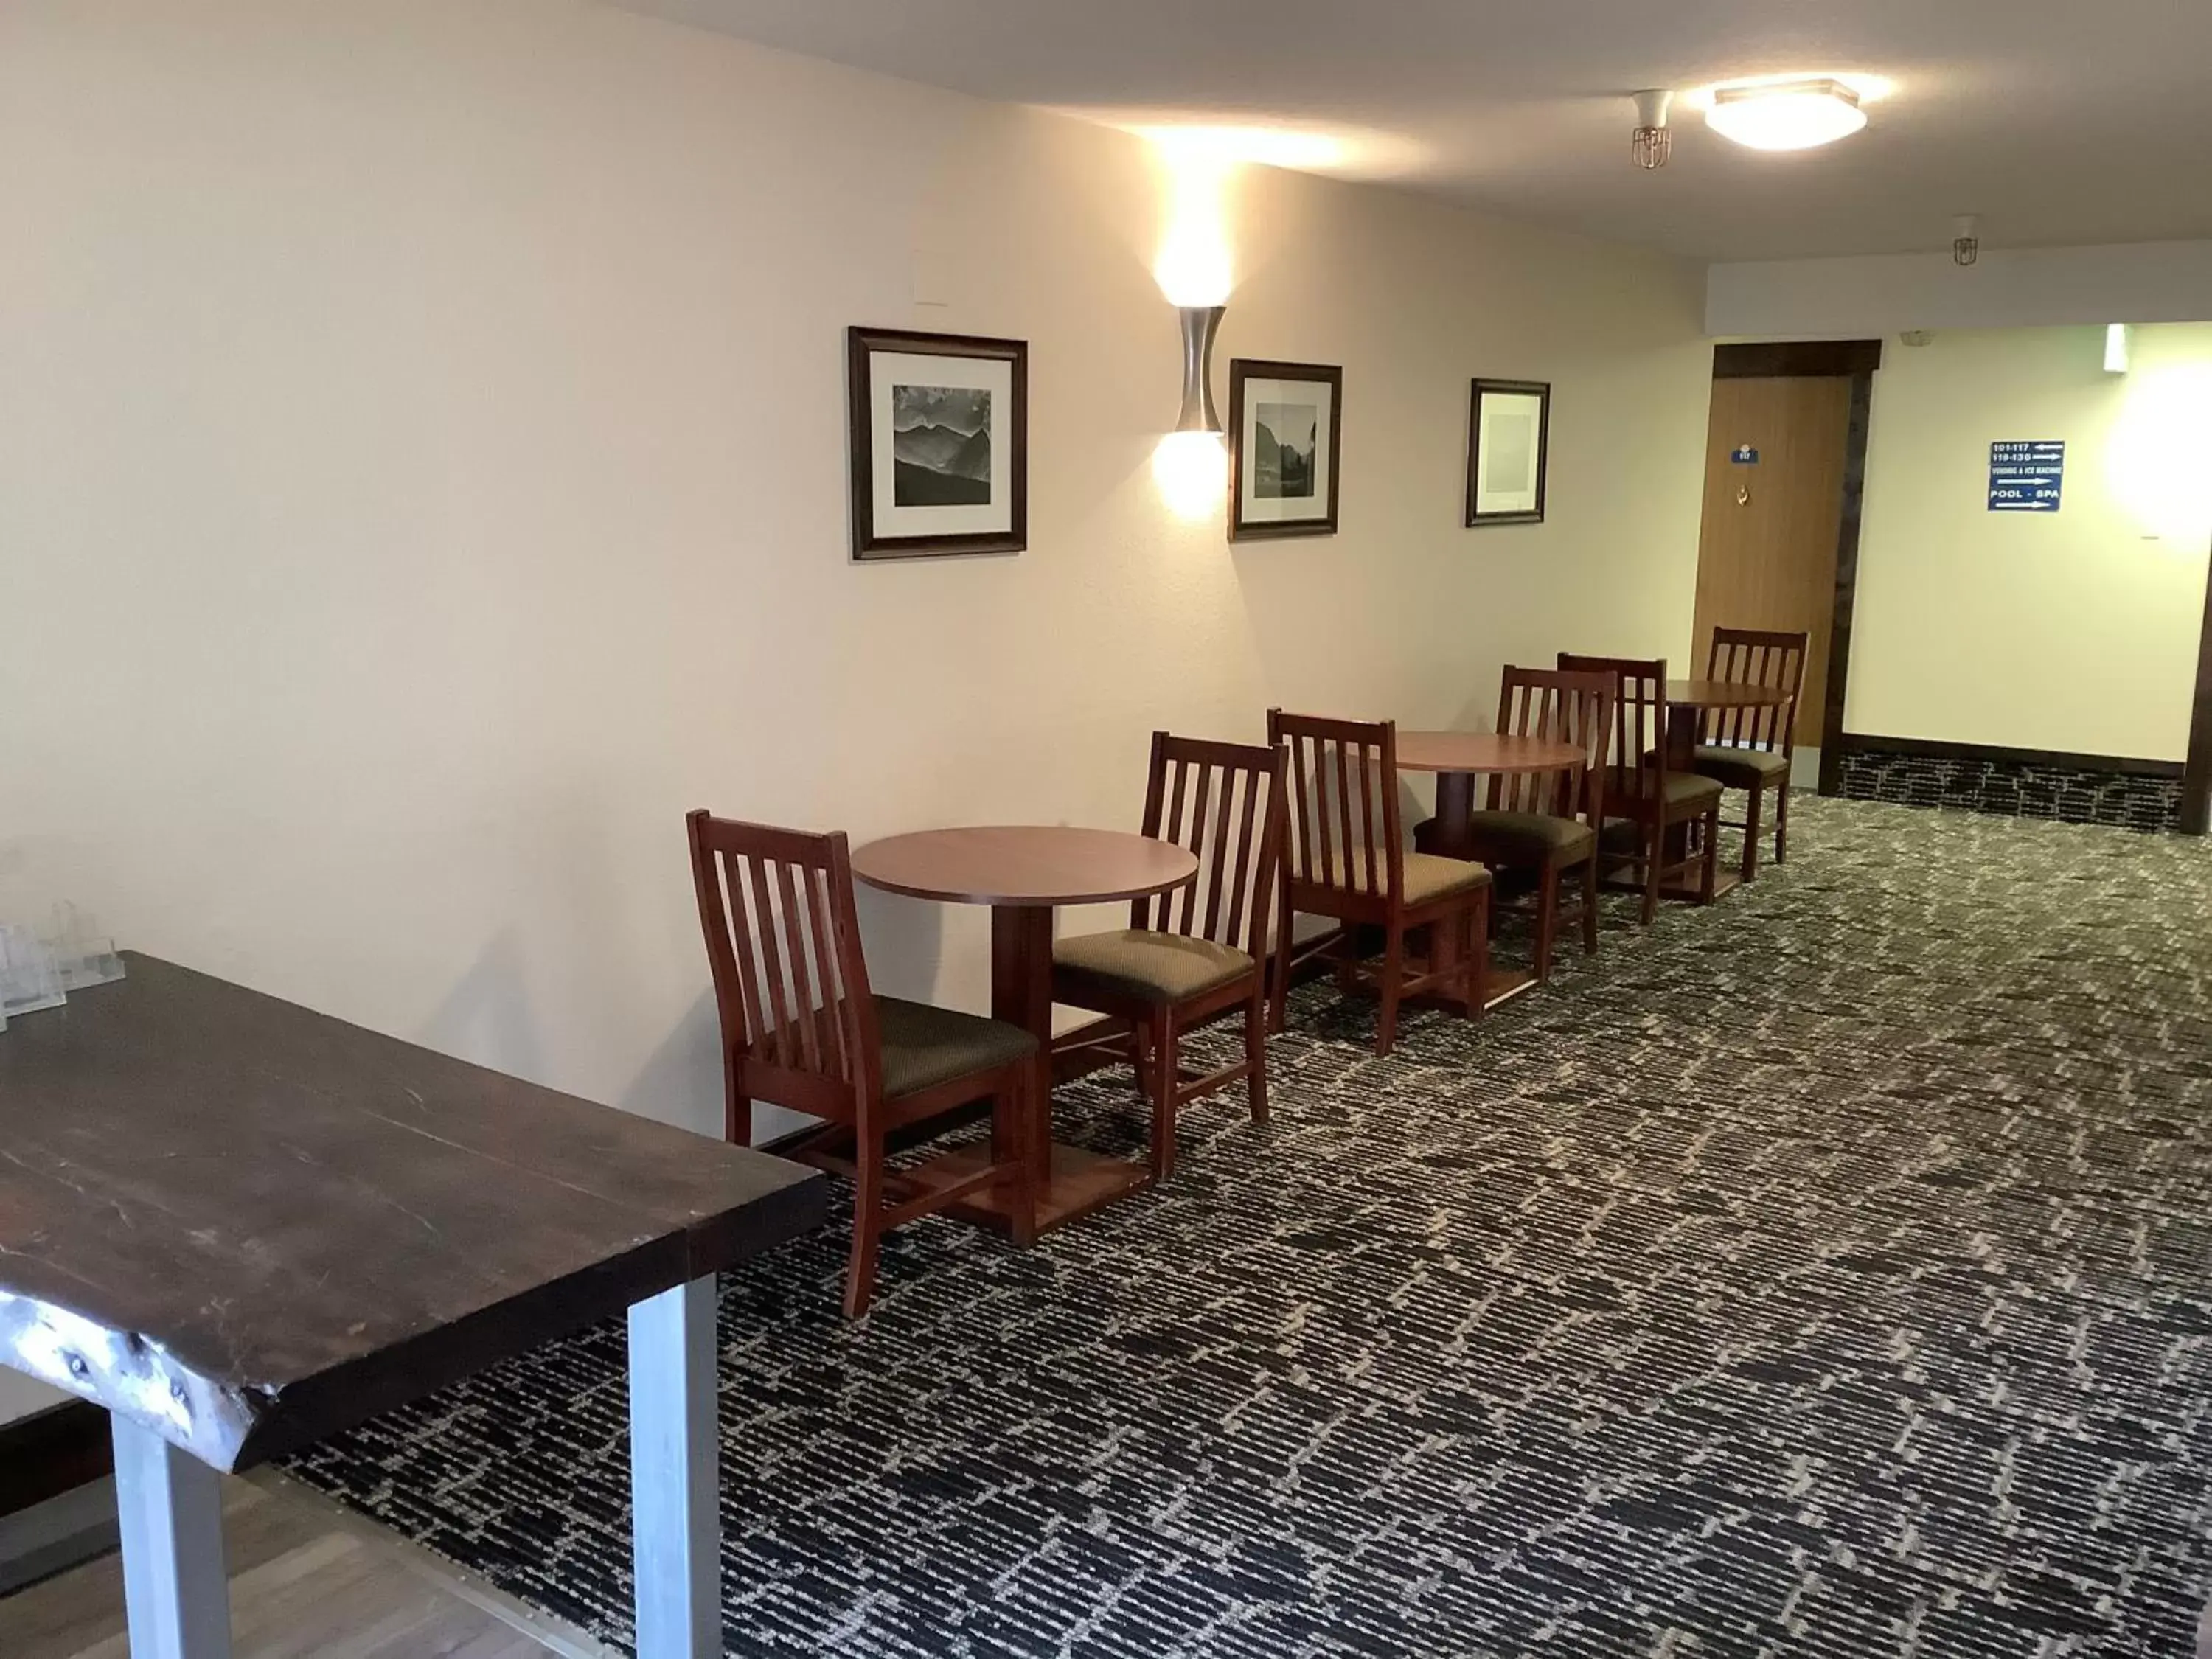 Area and facilities in Luxury Inn & Suites